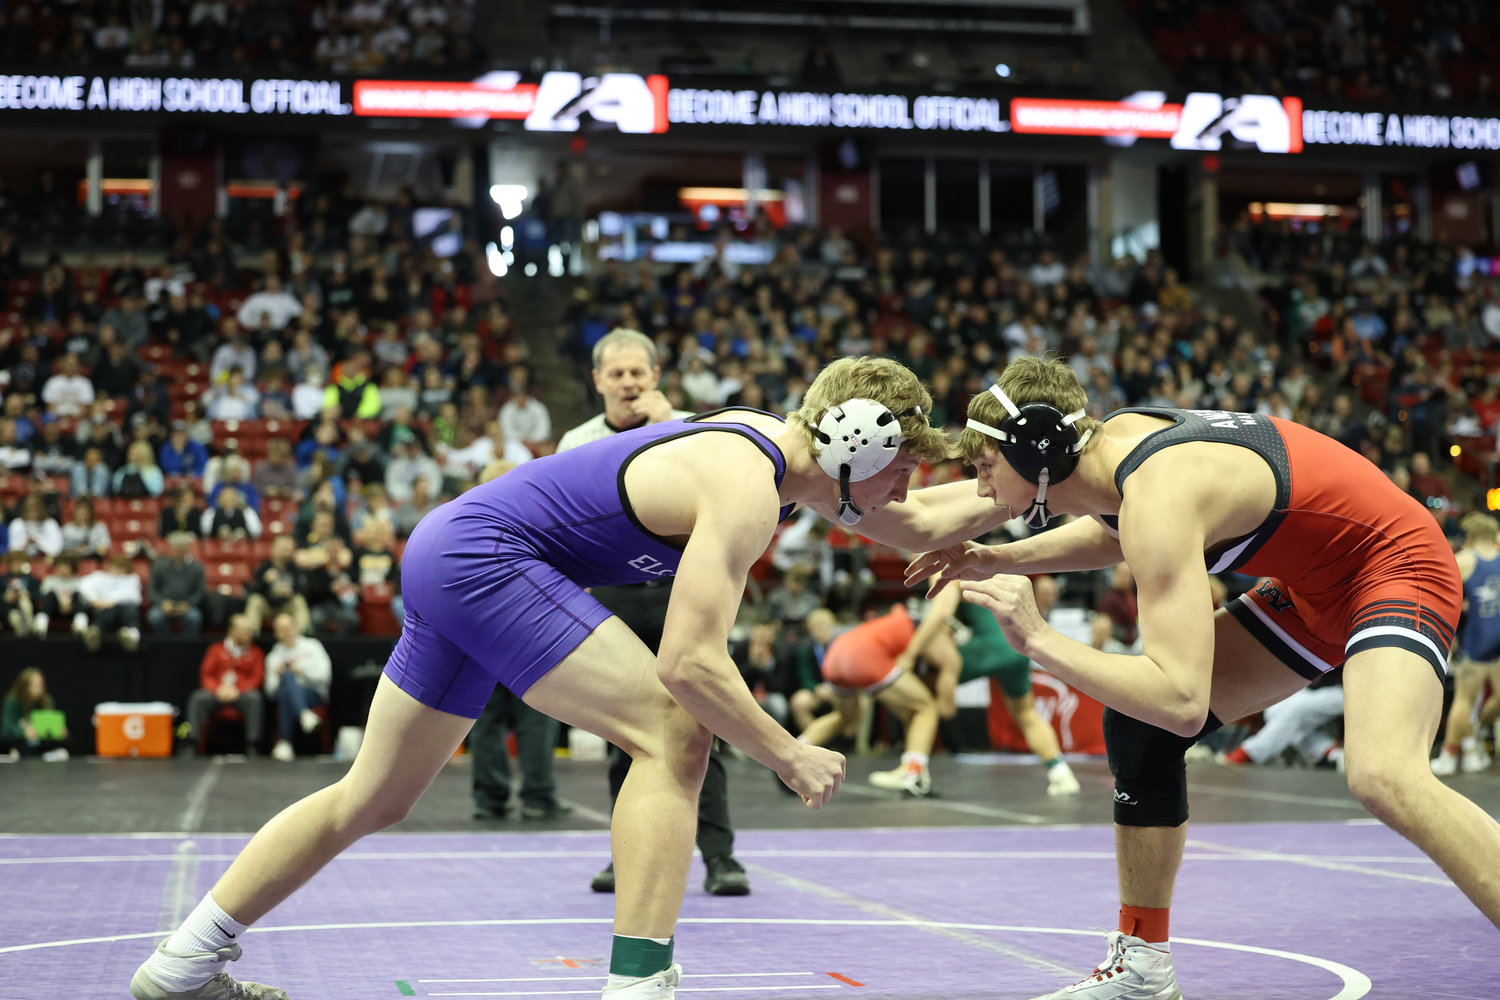 2-24-23 Ellsworth's Anthony Madsen ties up with Amery's Wyatt Ingham at the onset of the 182 pound quarterfinal Friday morning at the WIAA state wrestling tournament...Nate Beier/GX3 Media